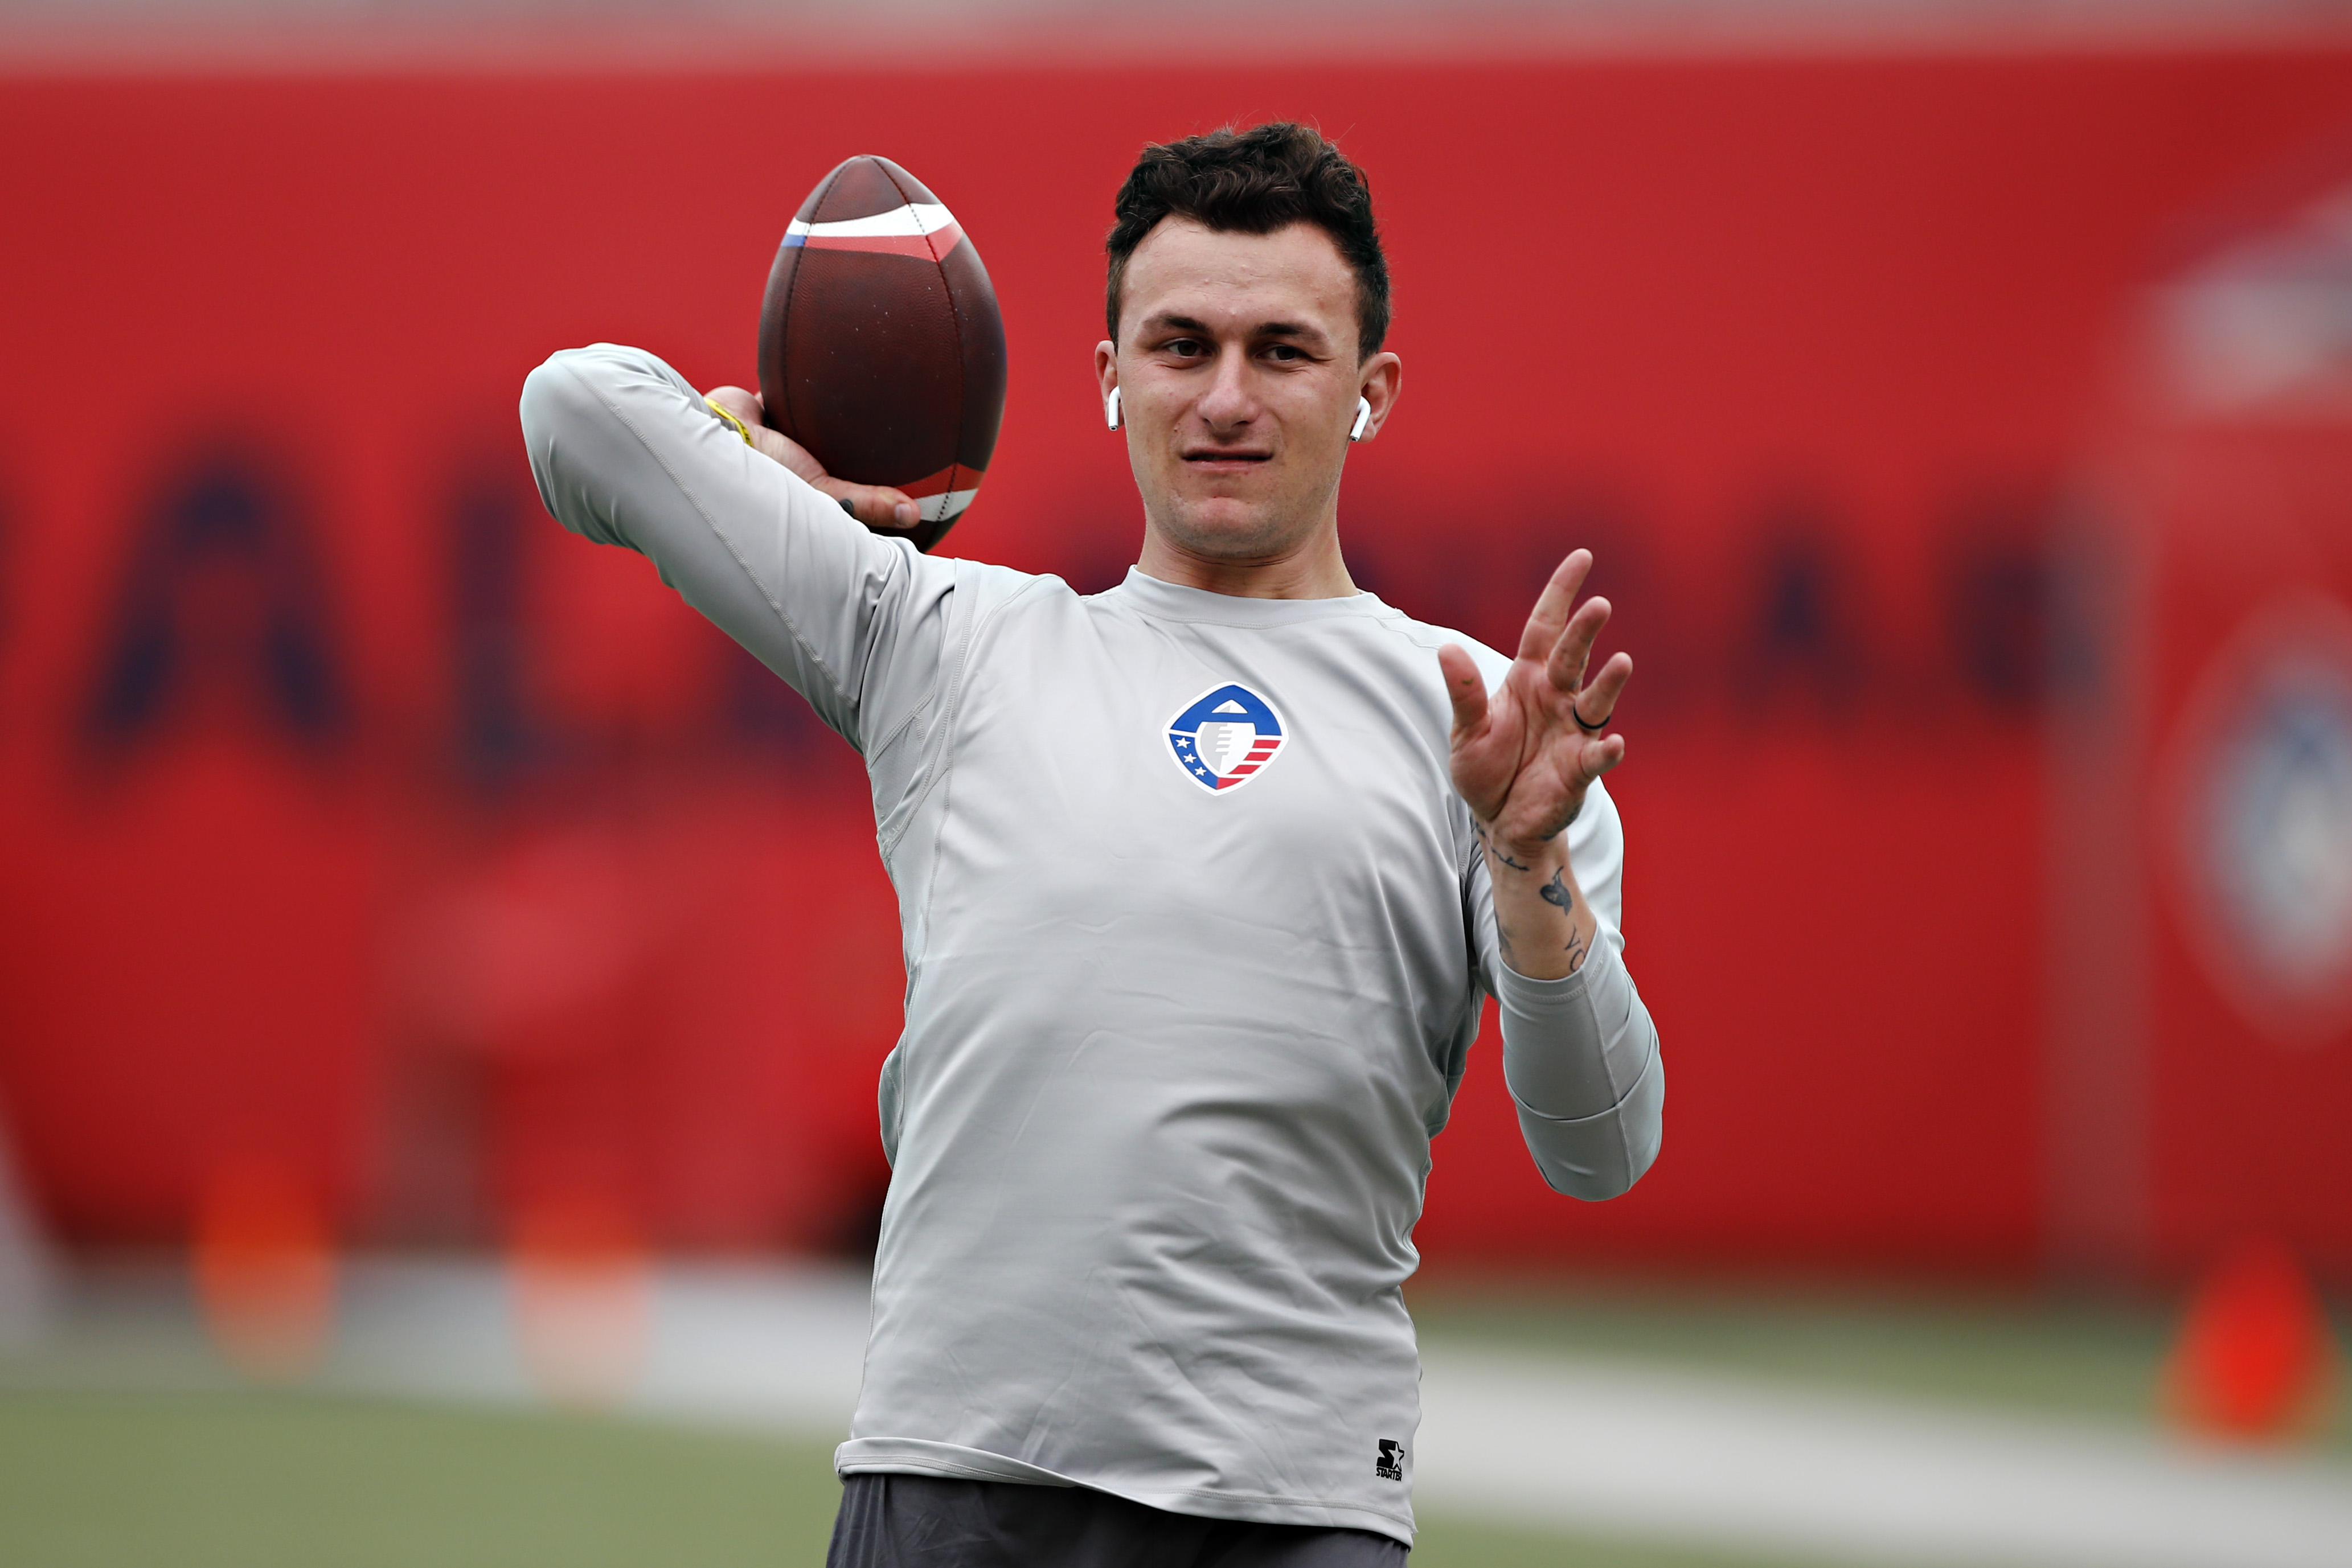 Johnny Manziel Self Roasted His Disastrous Nfl Career In A Tweet About His Short Time In The